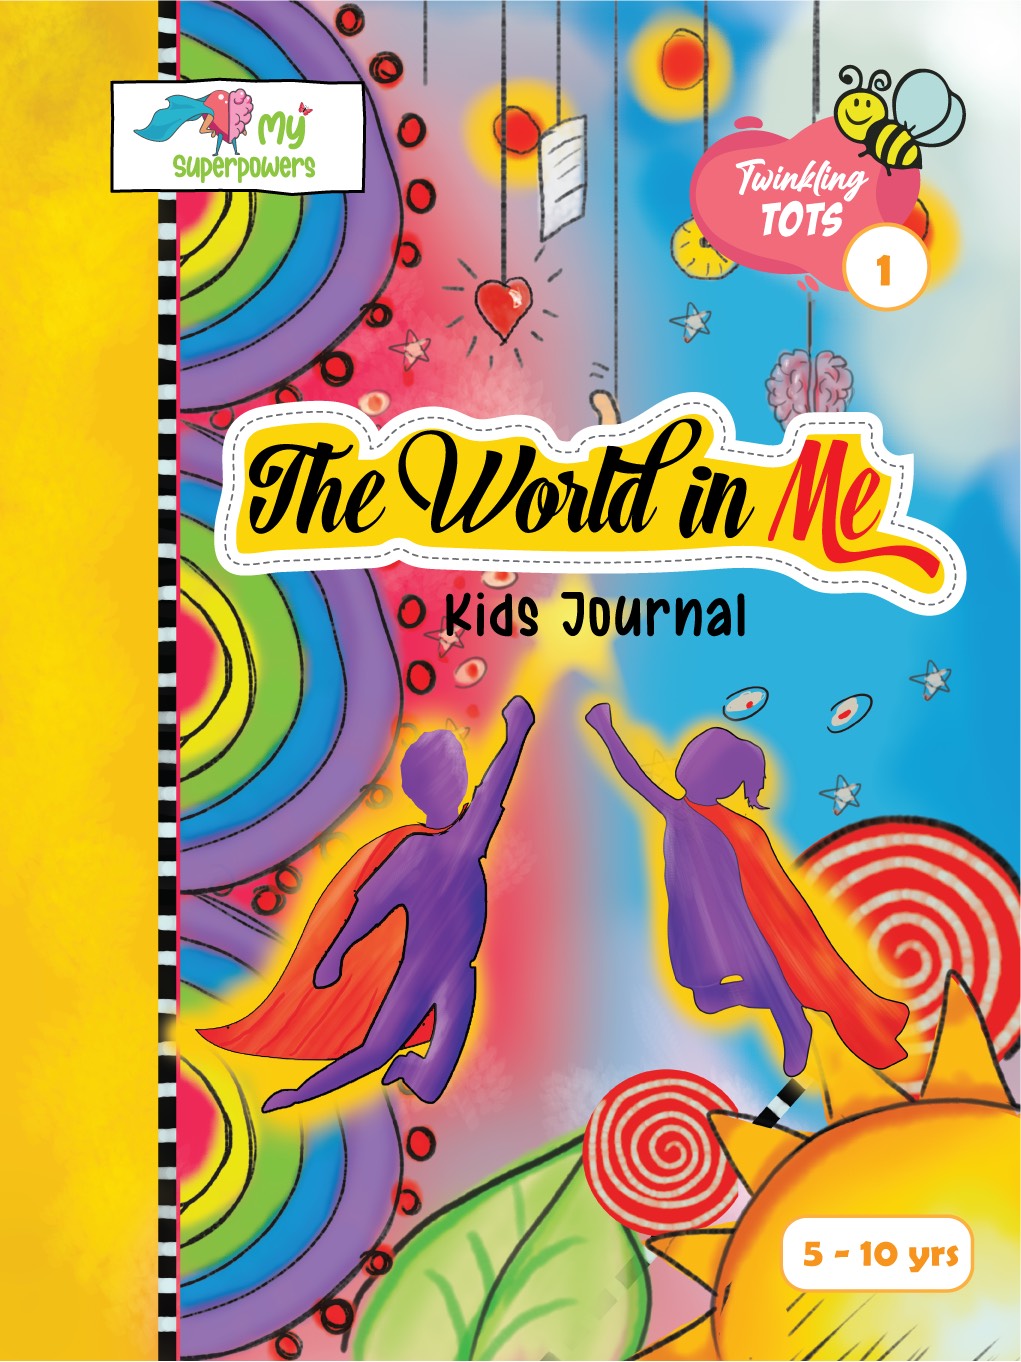 The World In Me - Journal for kids